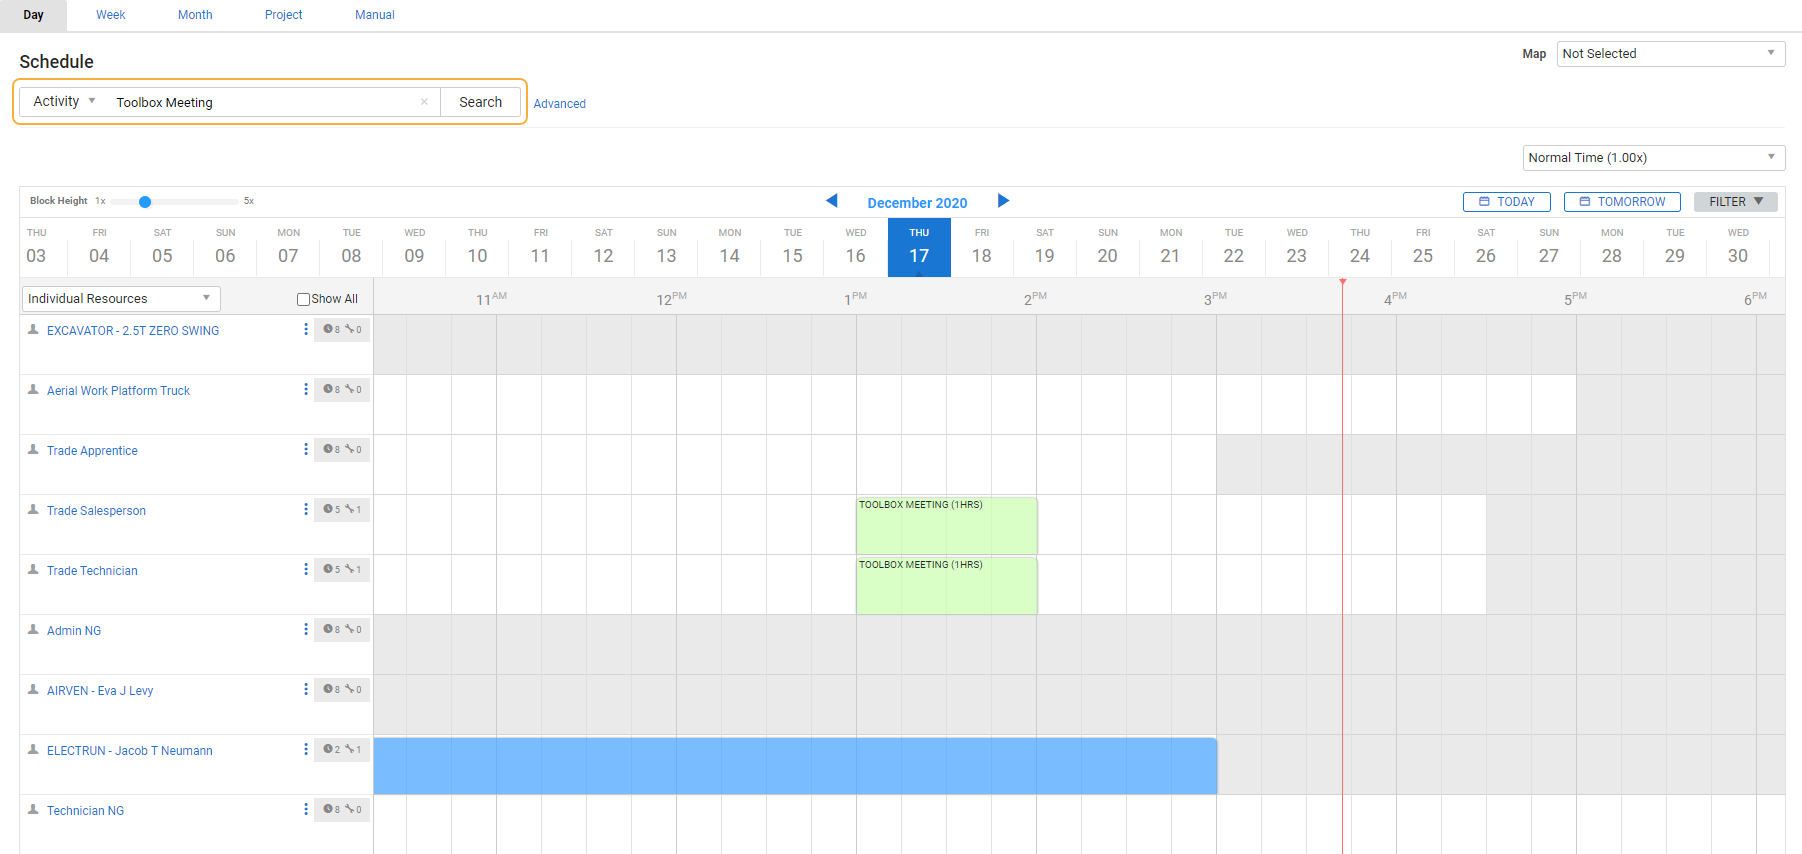 A screenshot of an activity scheduled in Day View.